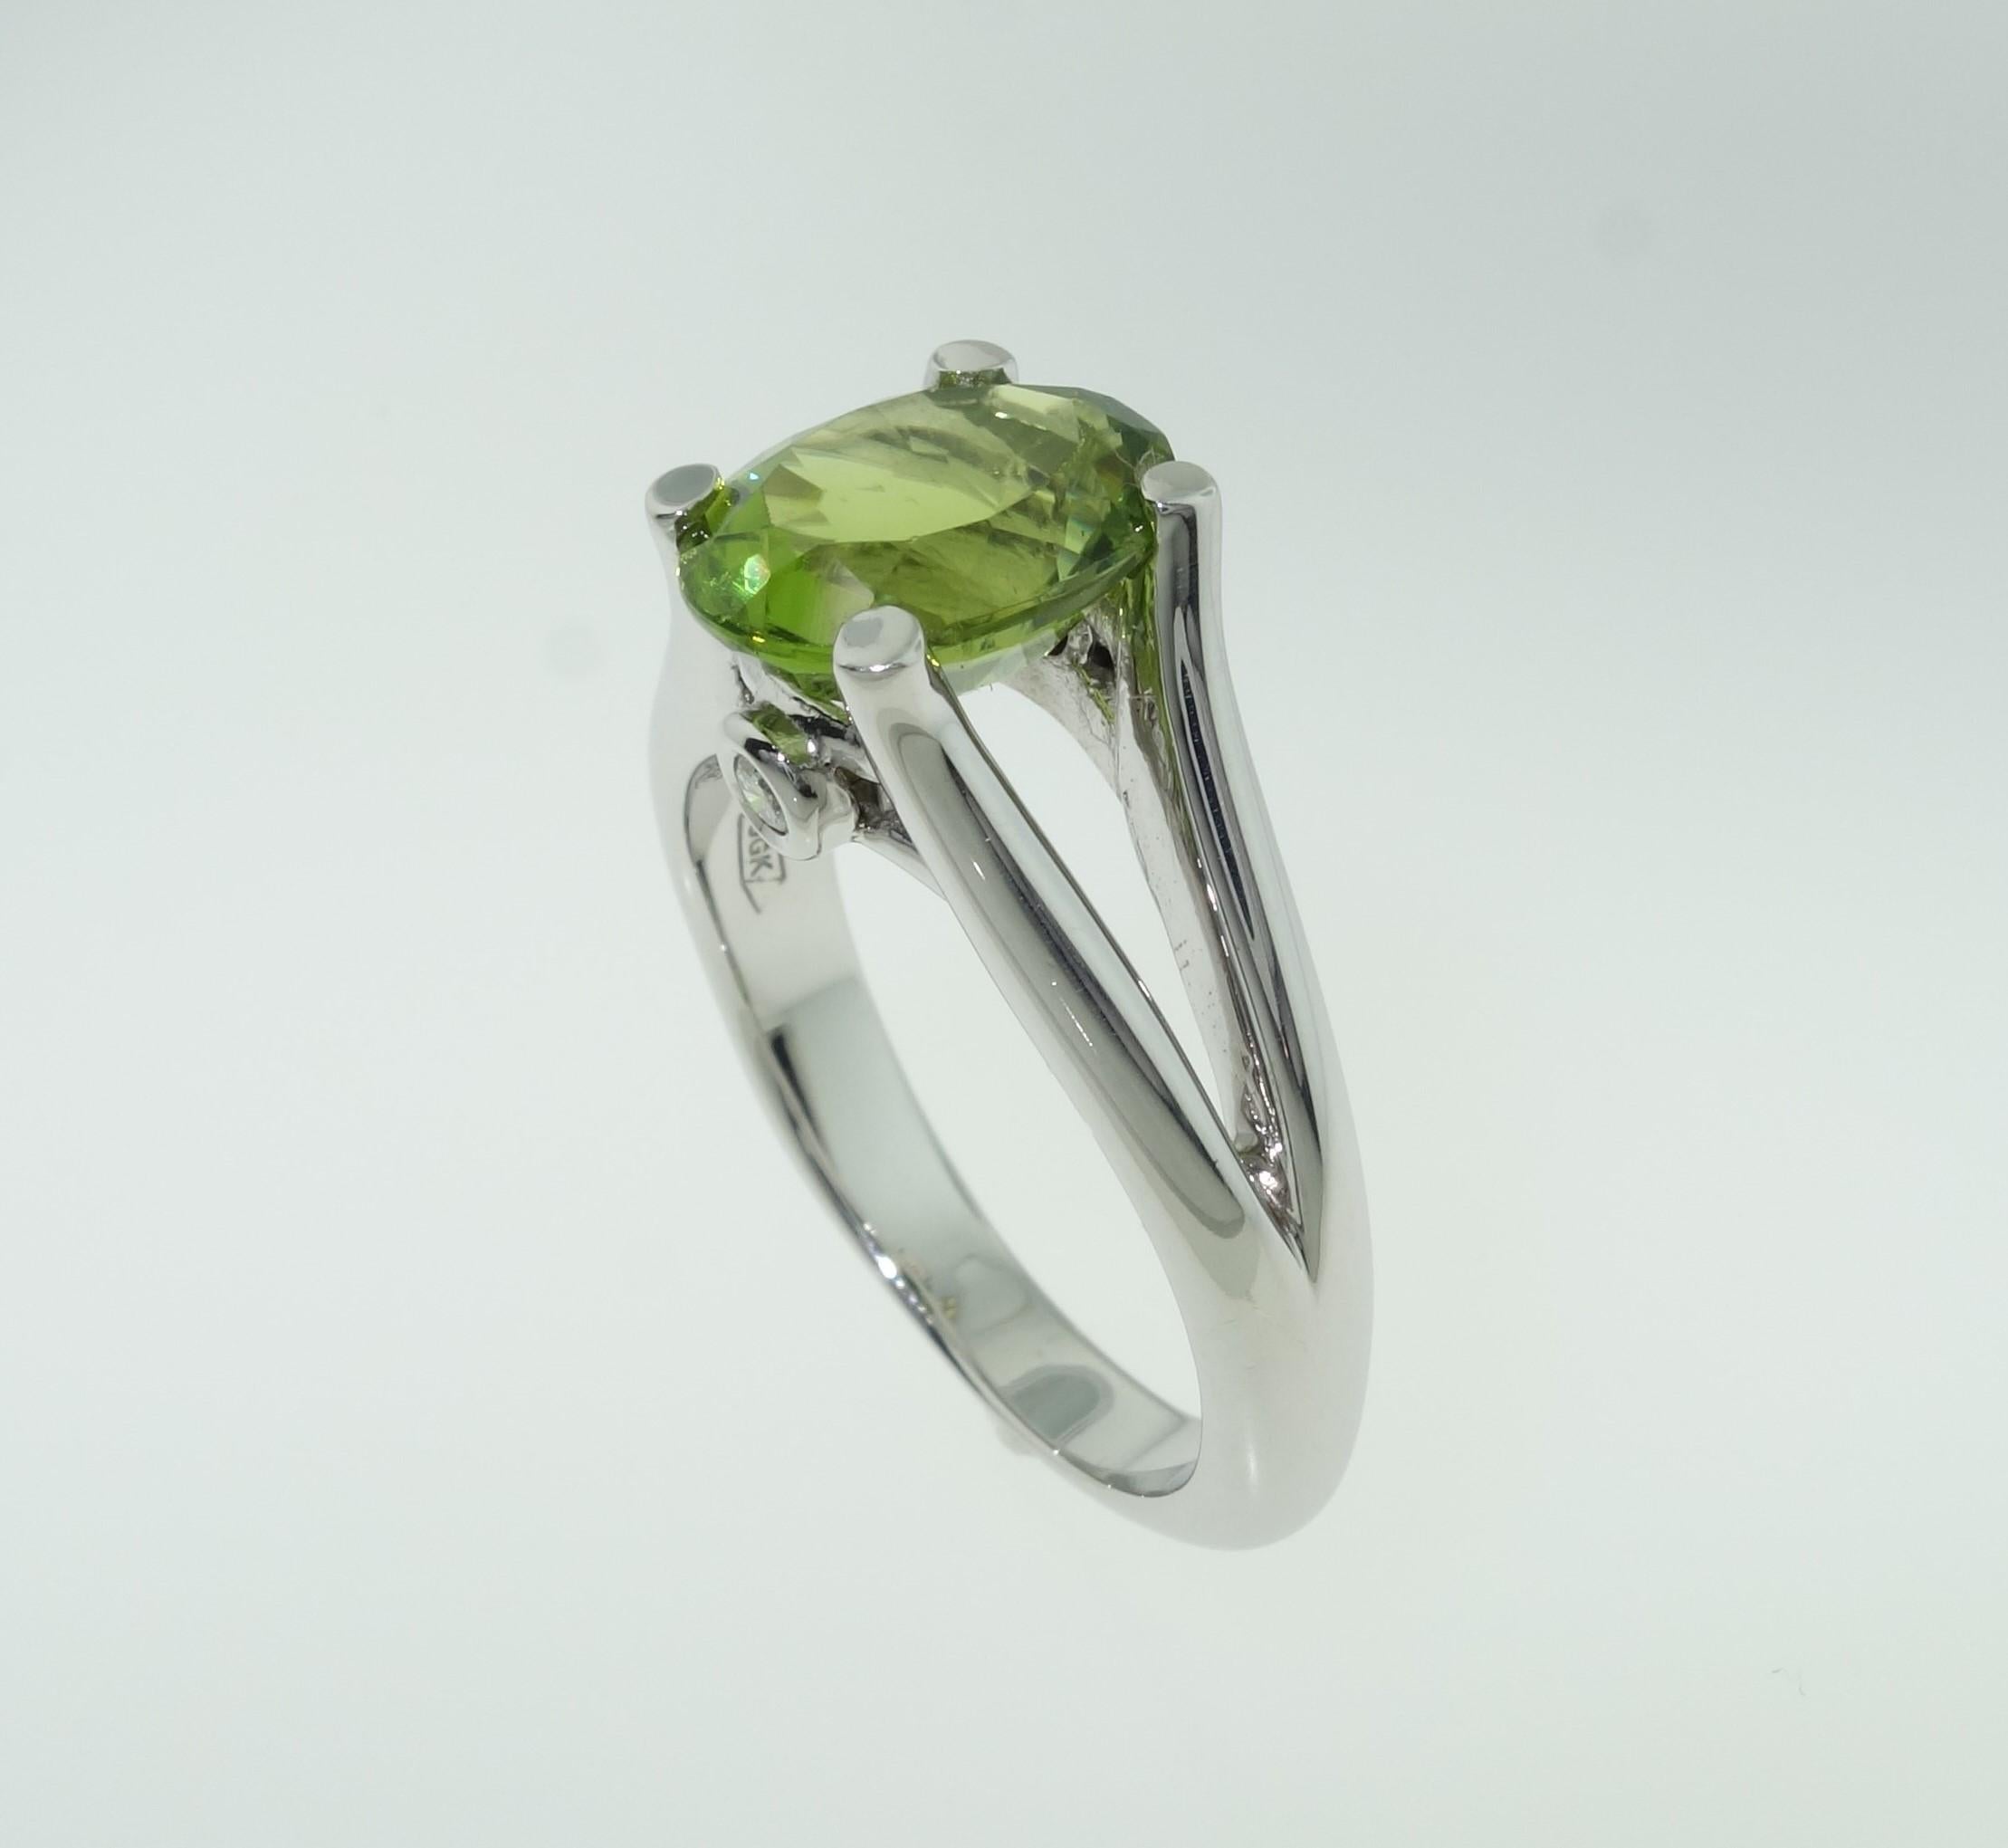 Beautiful ring featuring a 3.01 Carat Peridot in center enhanced on either side with Diamonds; approx. 0.06 total carat weight; Sterling Silver Tarnish-resistant Rhodium mounting. Size 8, we offer ring re-sizing; Classic and Stylish…illuminating